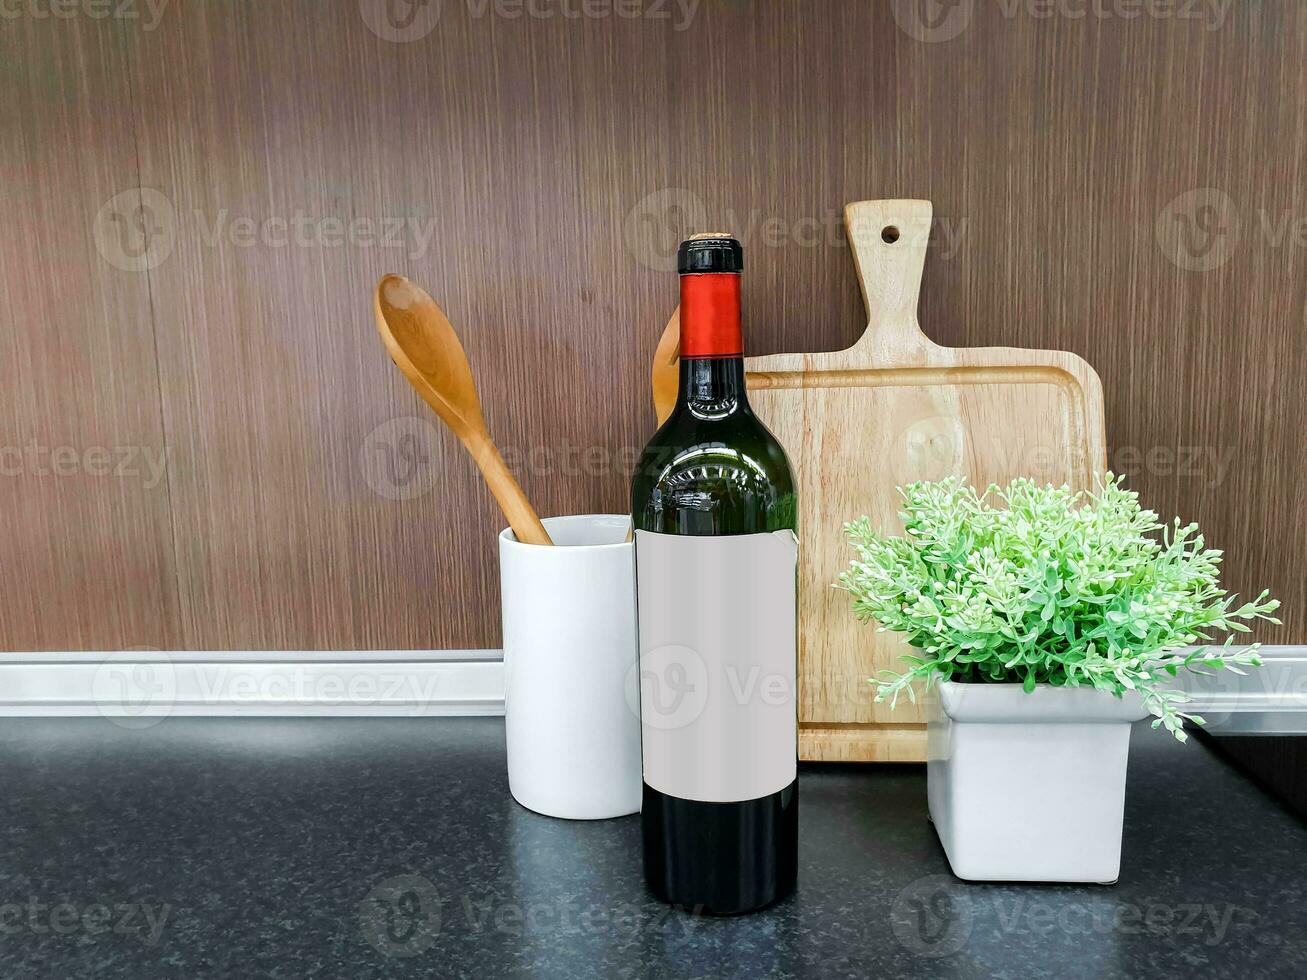 Wooden kitchenware and bottle of wine with decorate small green plant in white ceramic vase on kitchen shelves and wooden wall background. photo